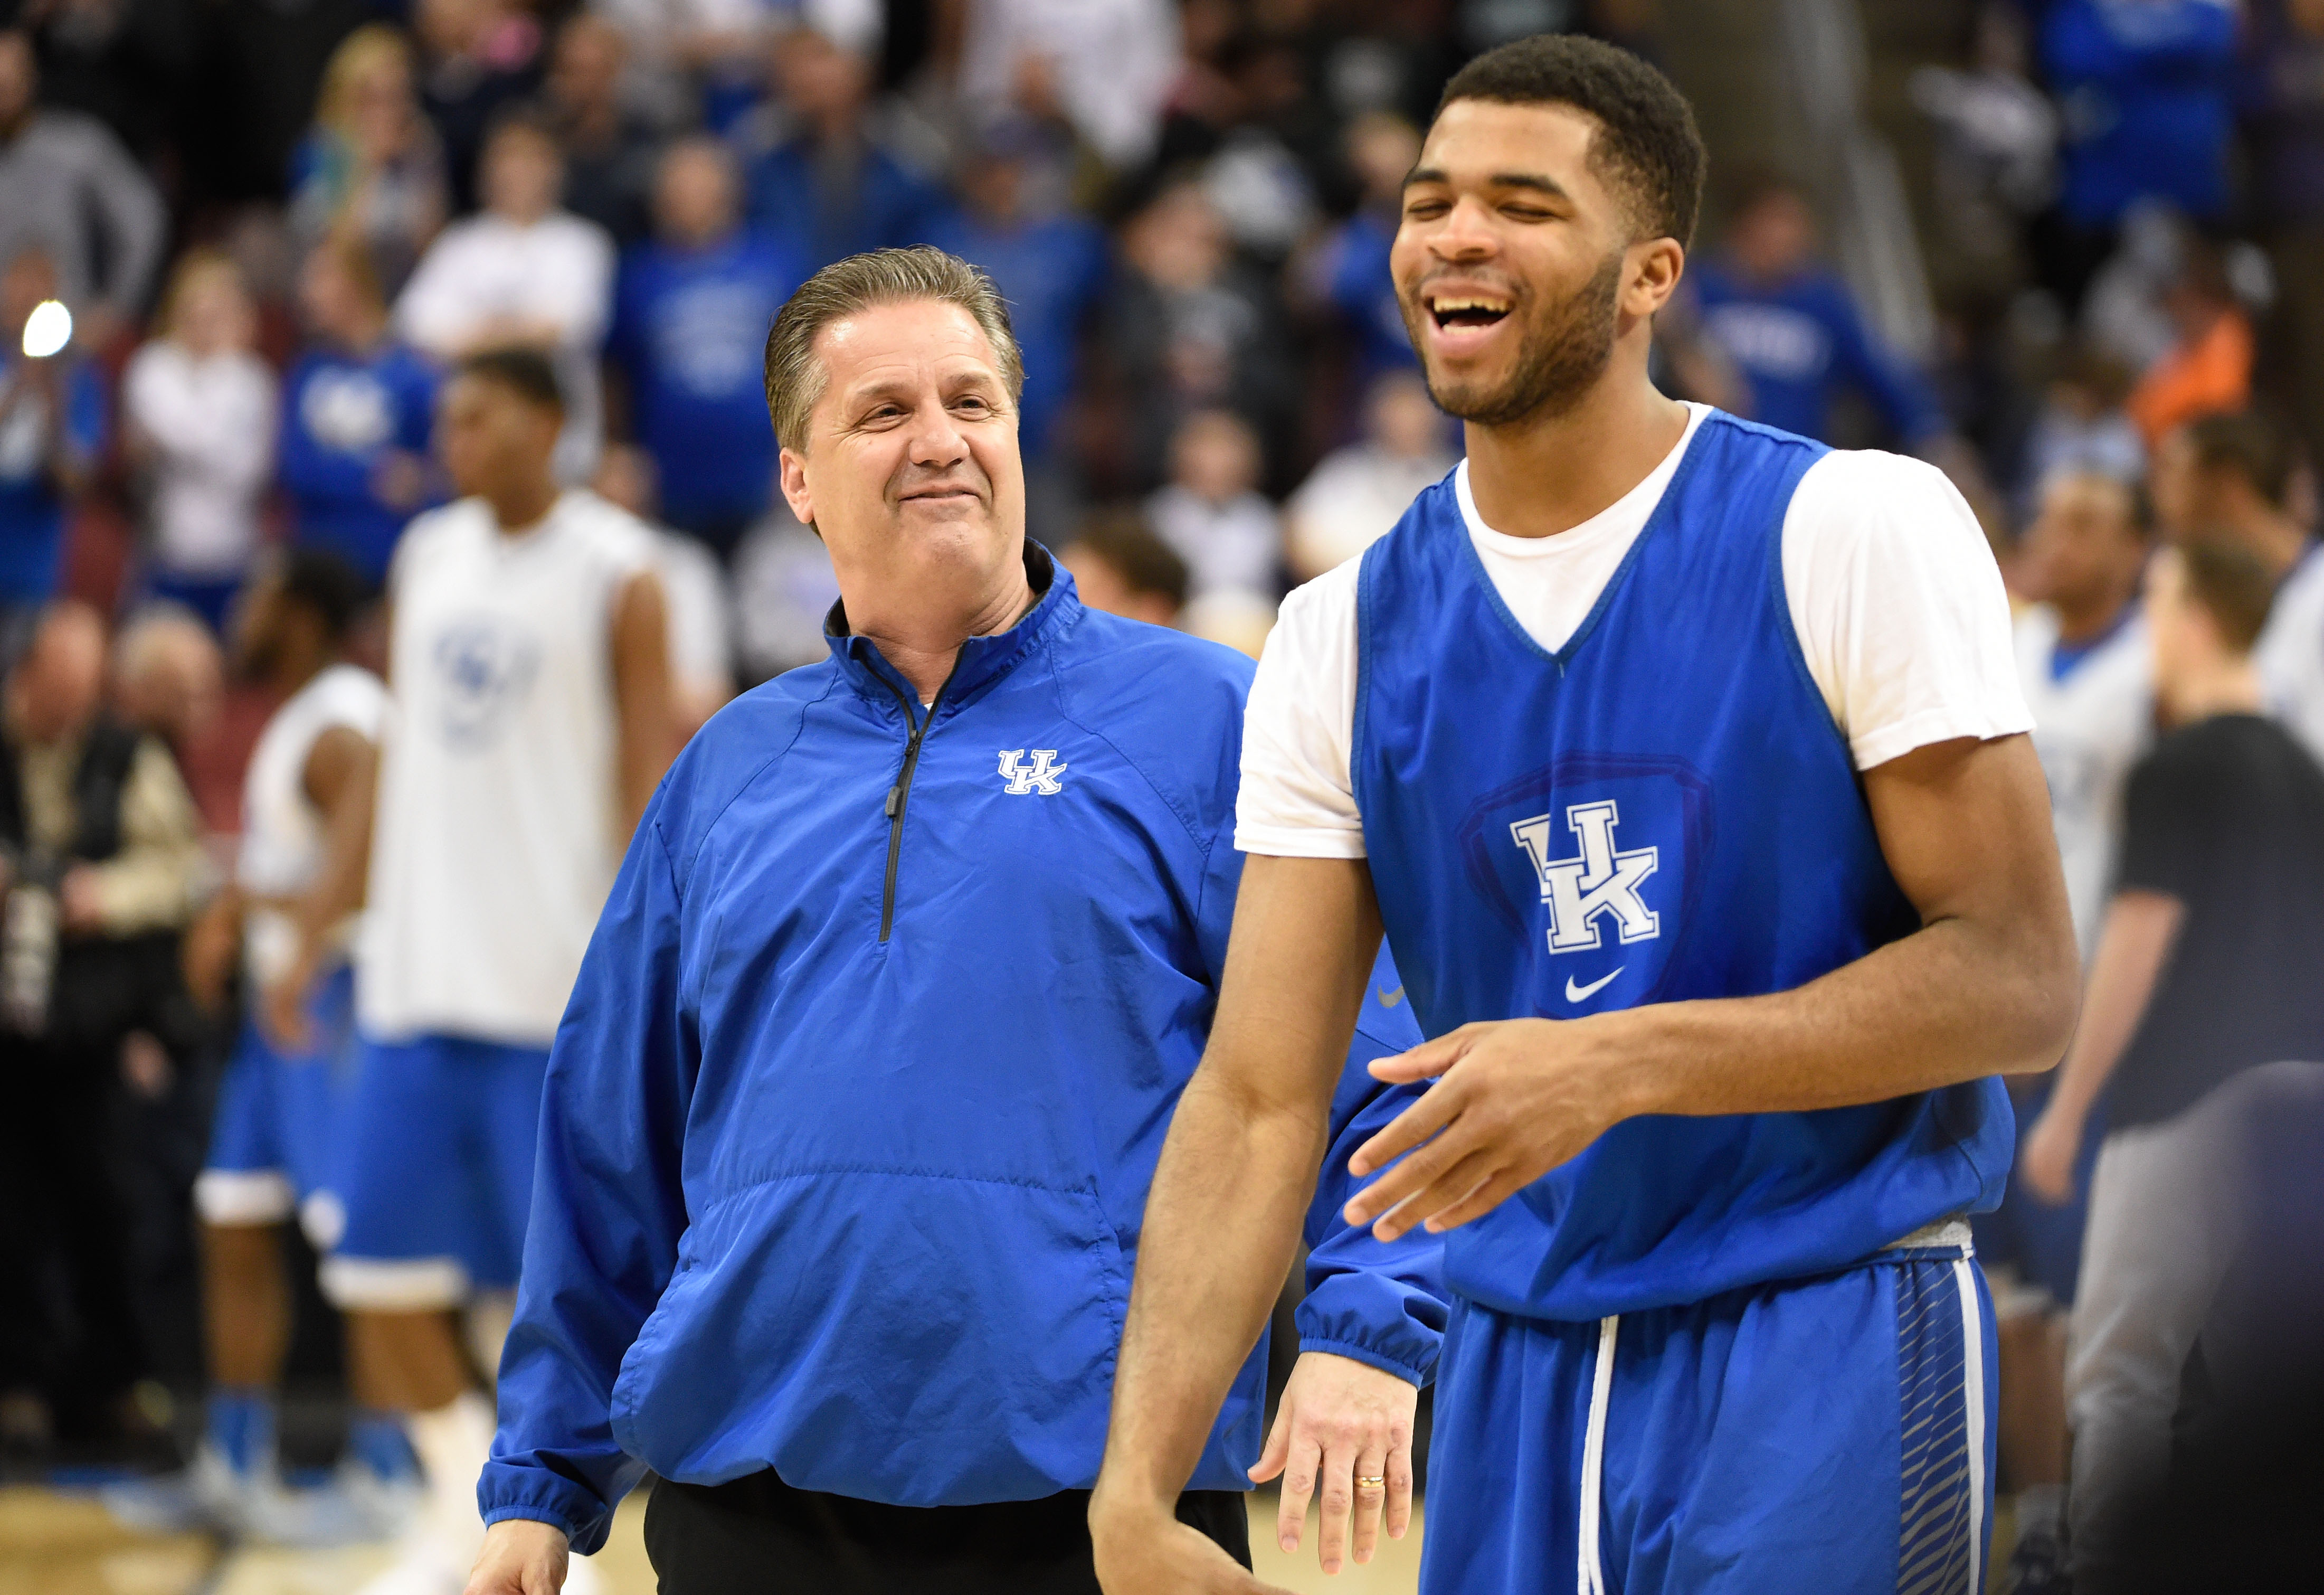 Mar 18, 2015; Louisville, KY, USA; Kentucky Wildcats head coach John Calipari talks to Kentucky Wildcats guard Andrew Harrison (5) during practice before the second round of the 2015 NCAA Tournament at KFC Yum! Center. Mandatory Credit: Jamie Rhodes-USA TODAY Sports